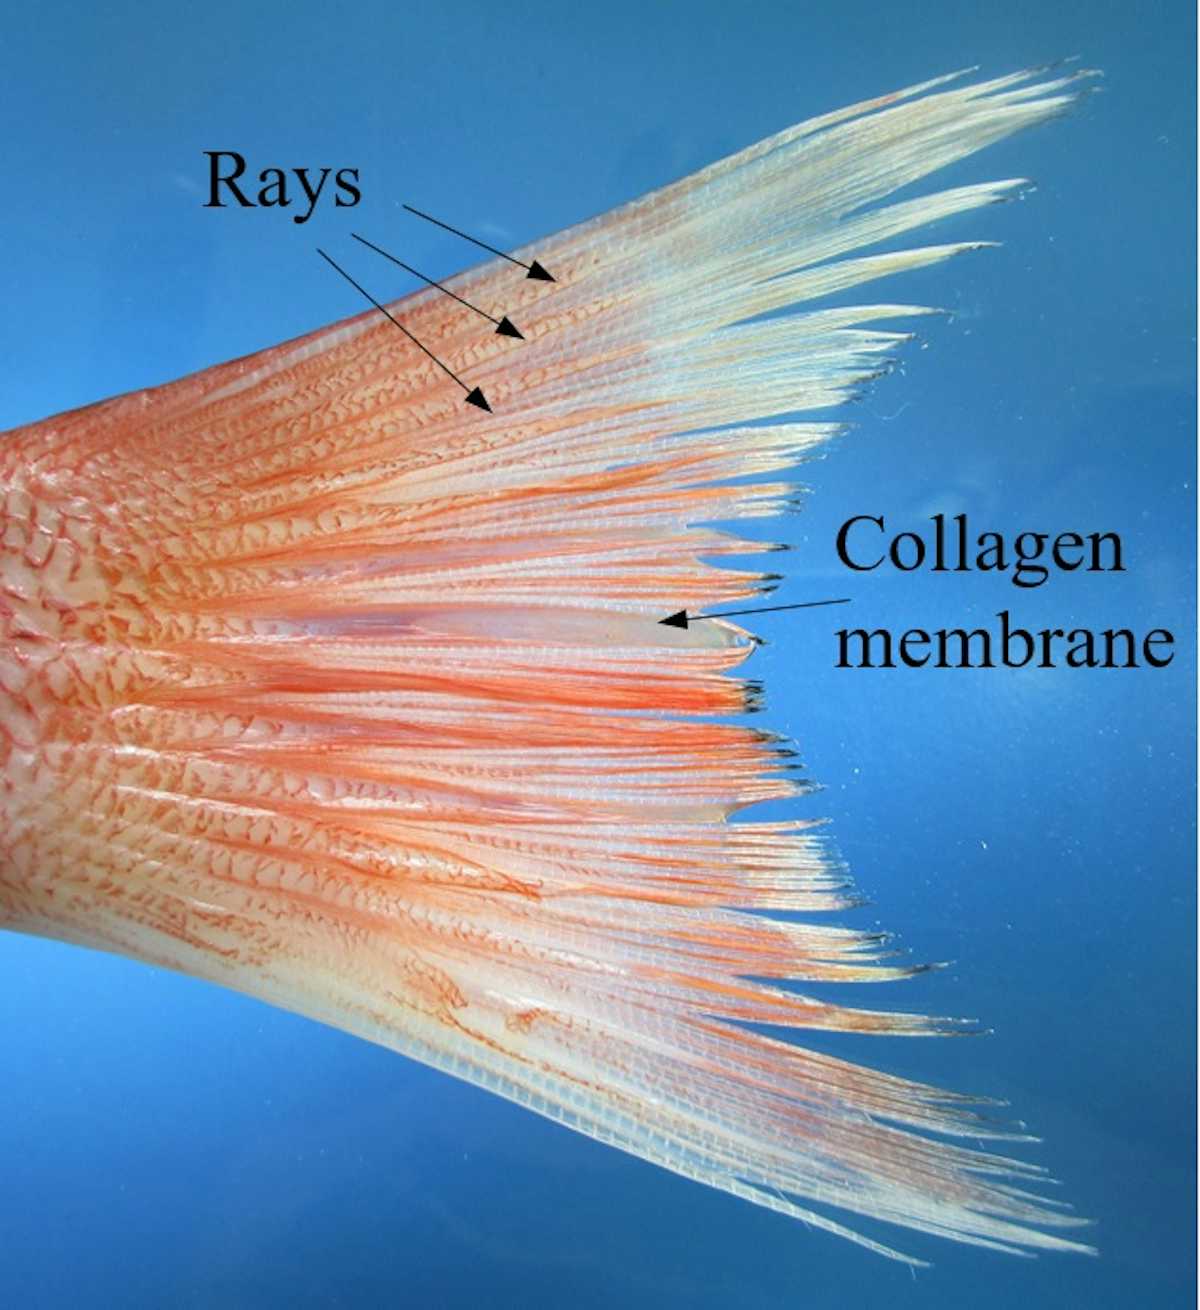 Fish fins are teaching us the secret to flexible